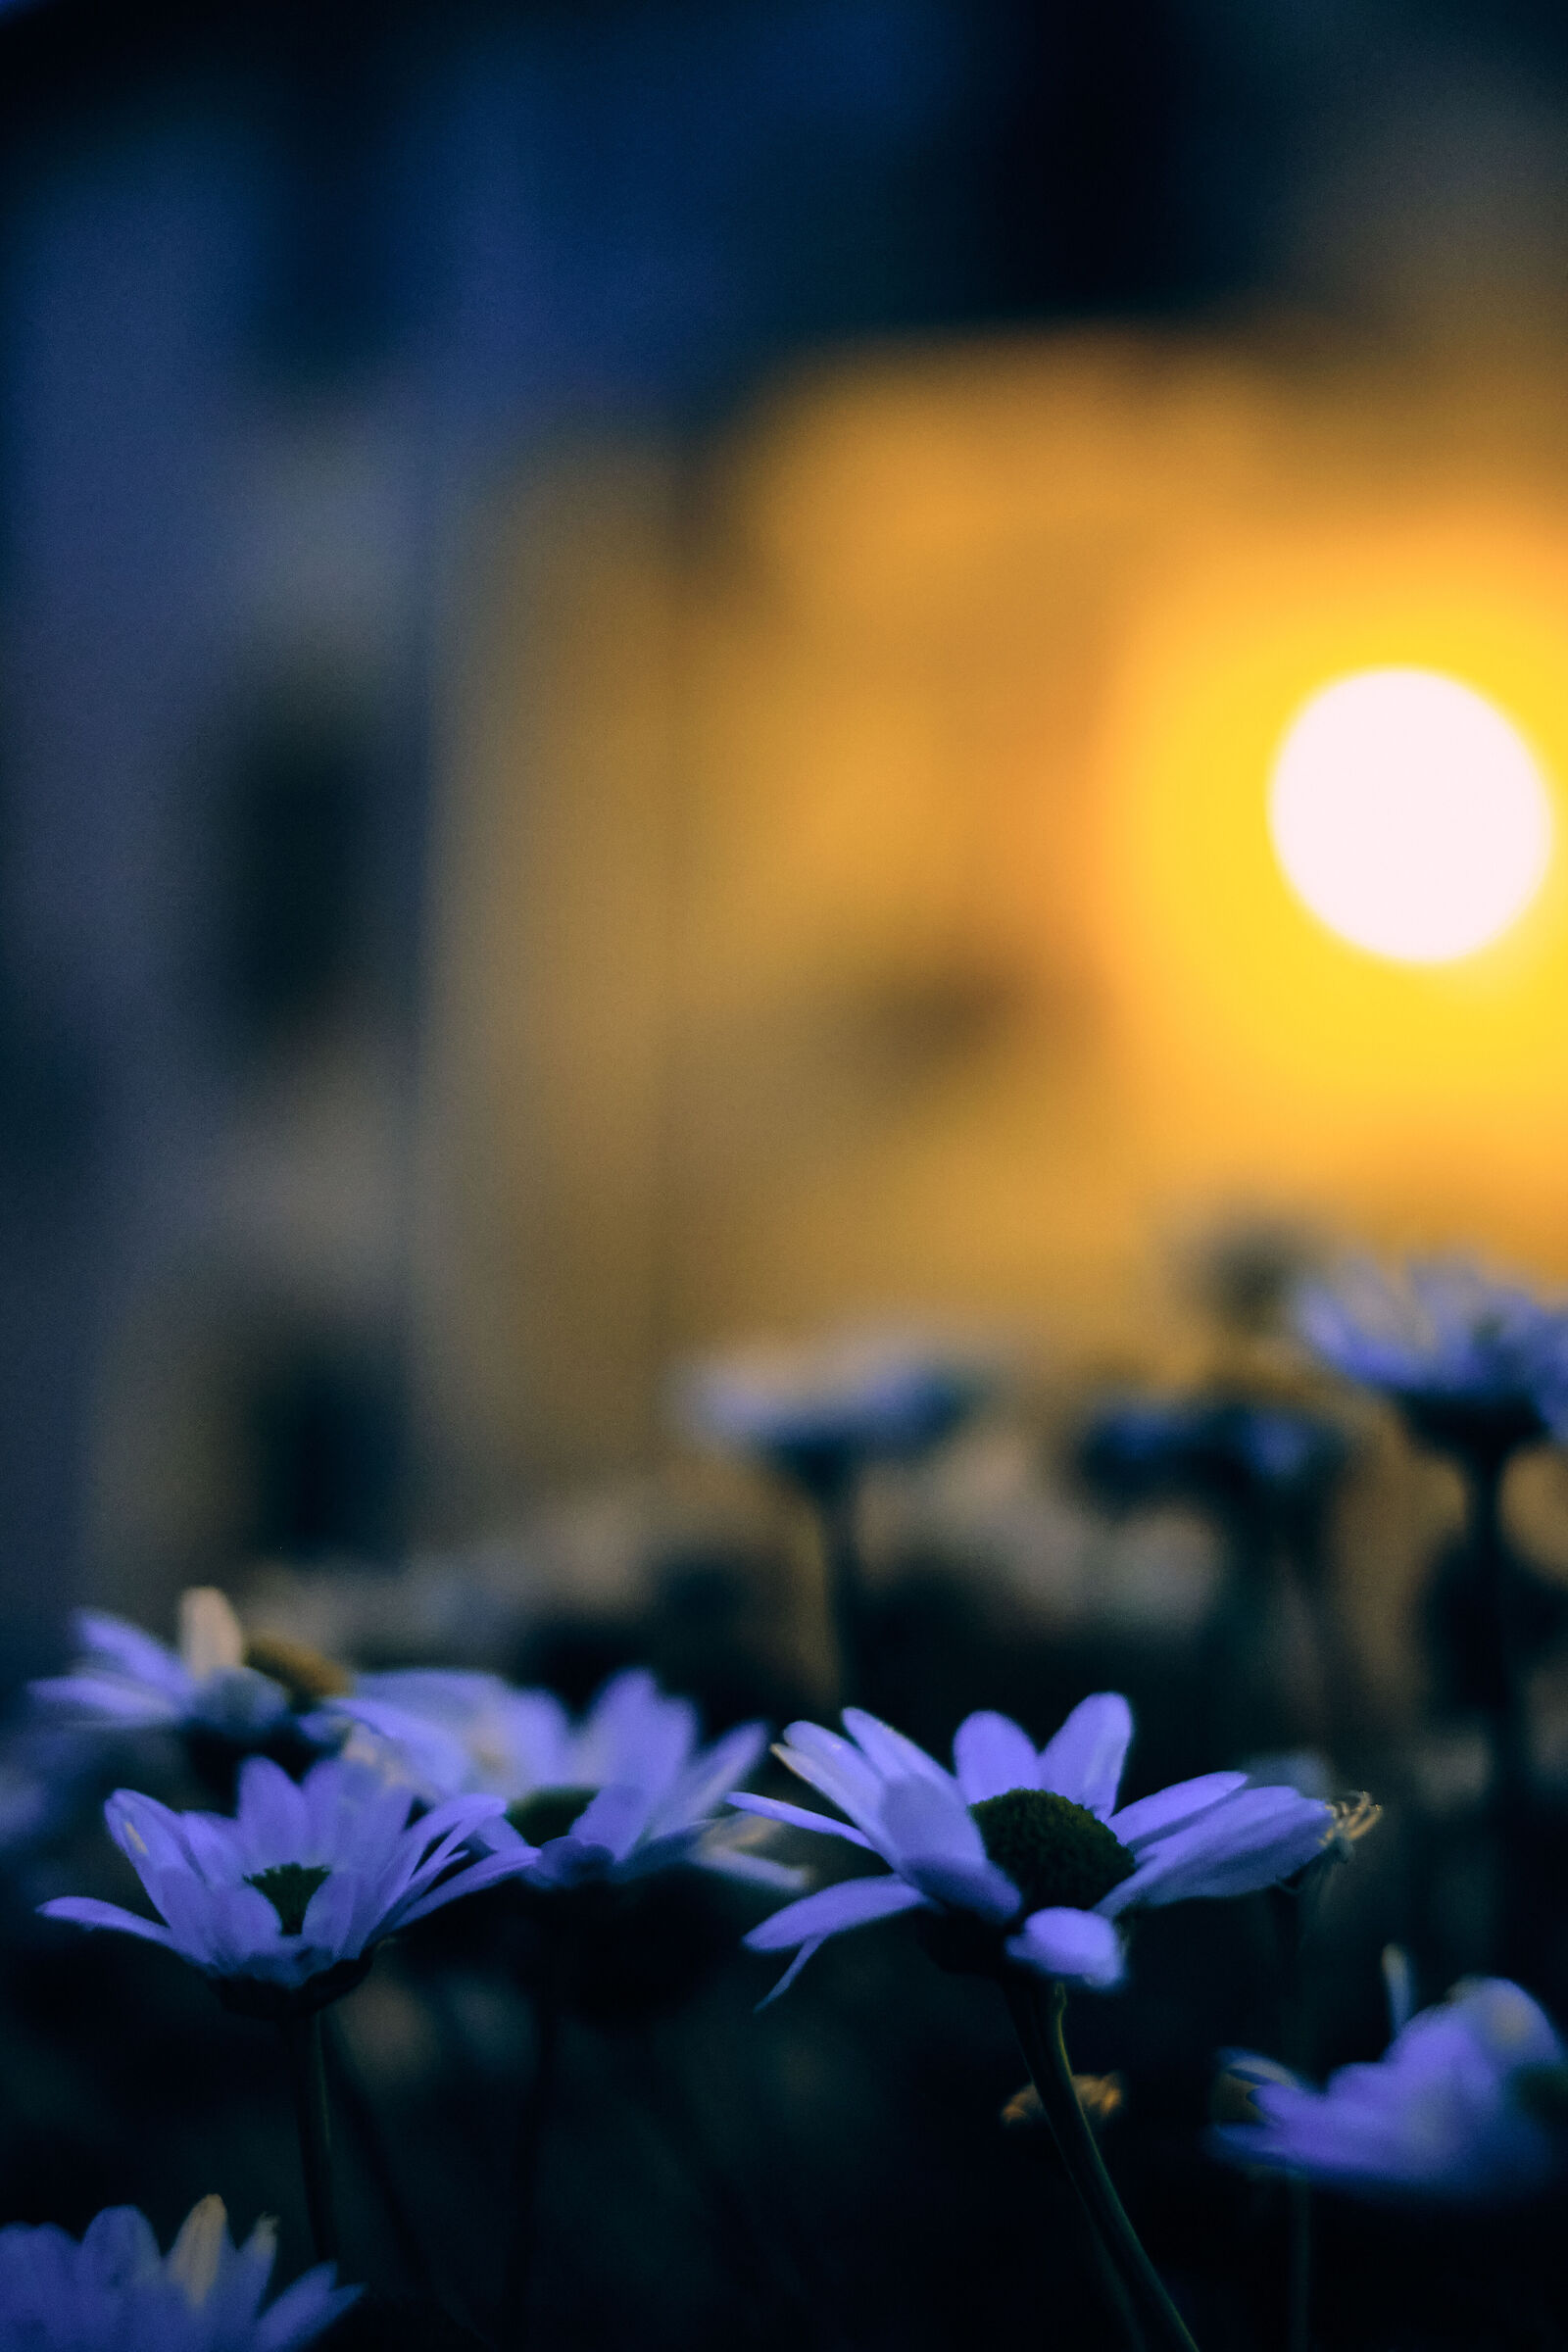 Flowers in the evening...